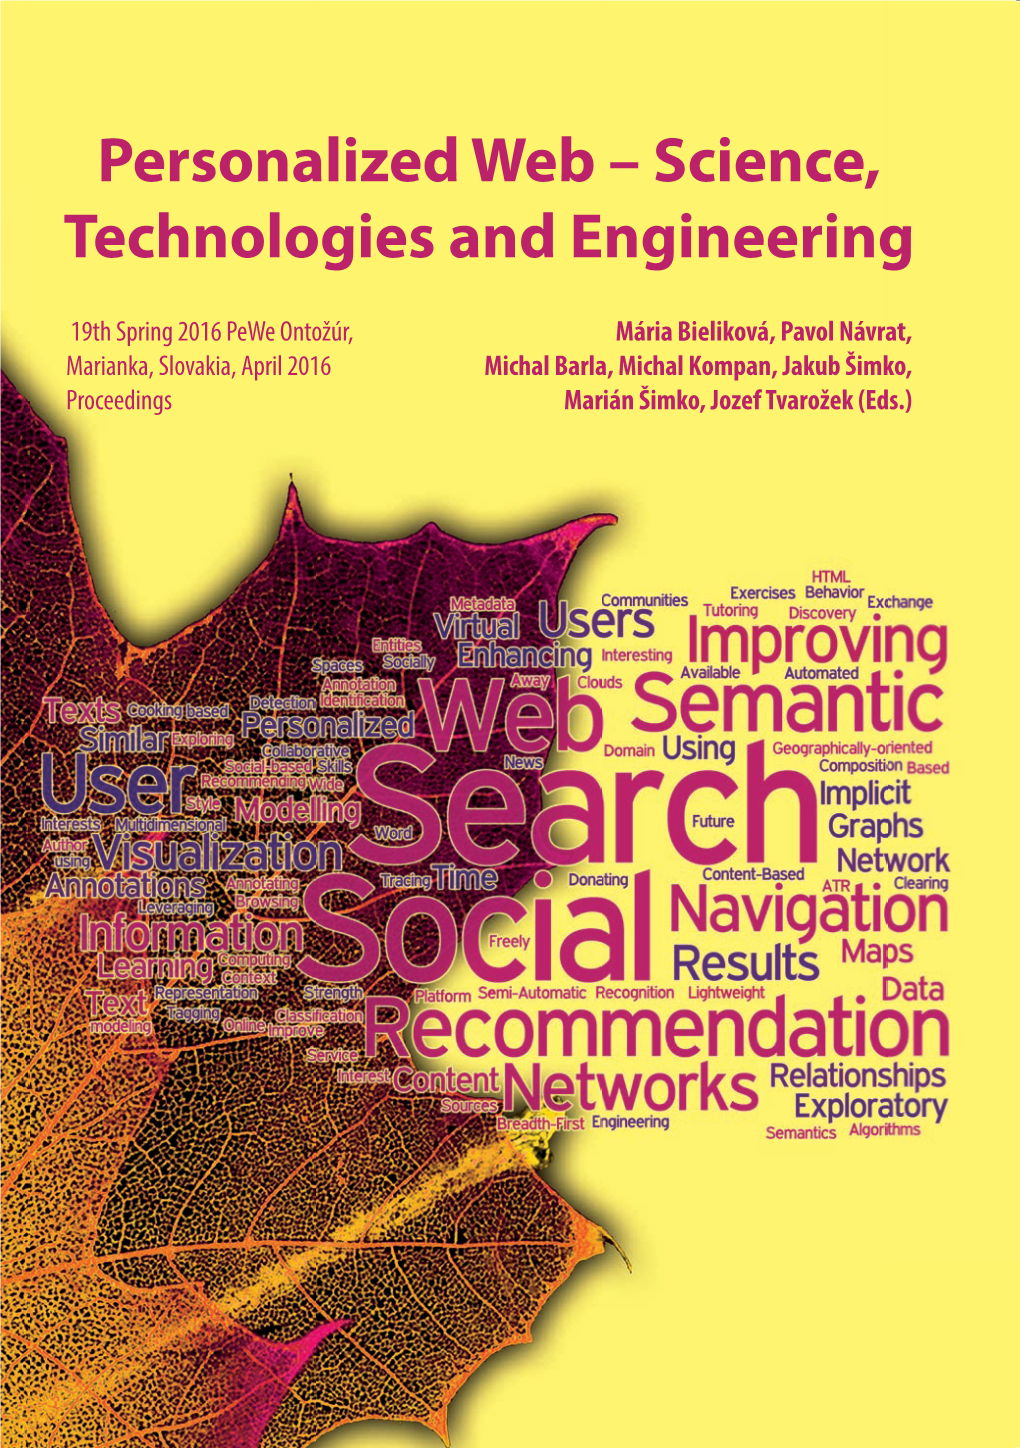 Science, Technologies and Engineering